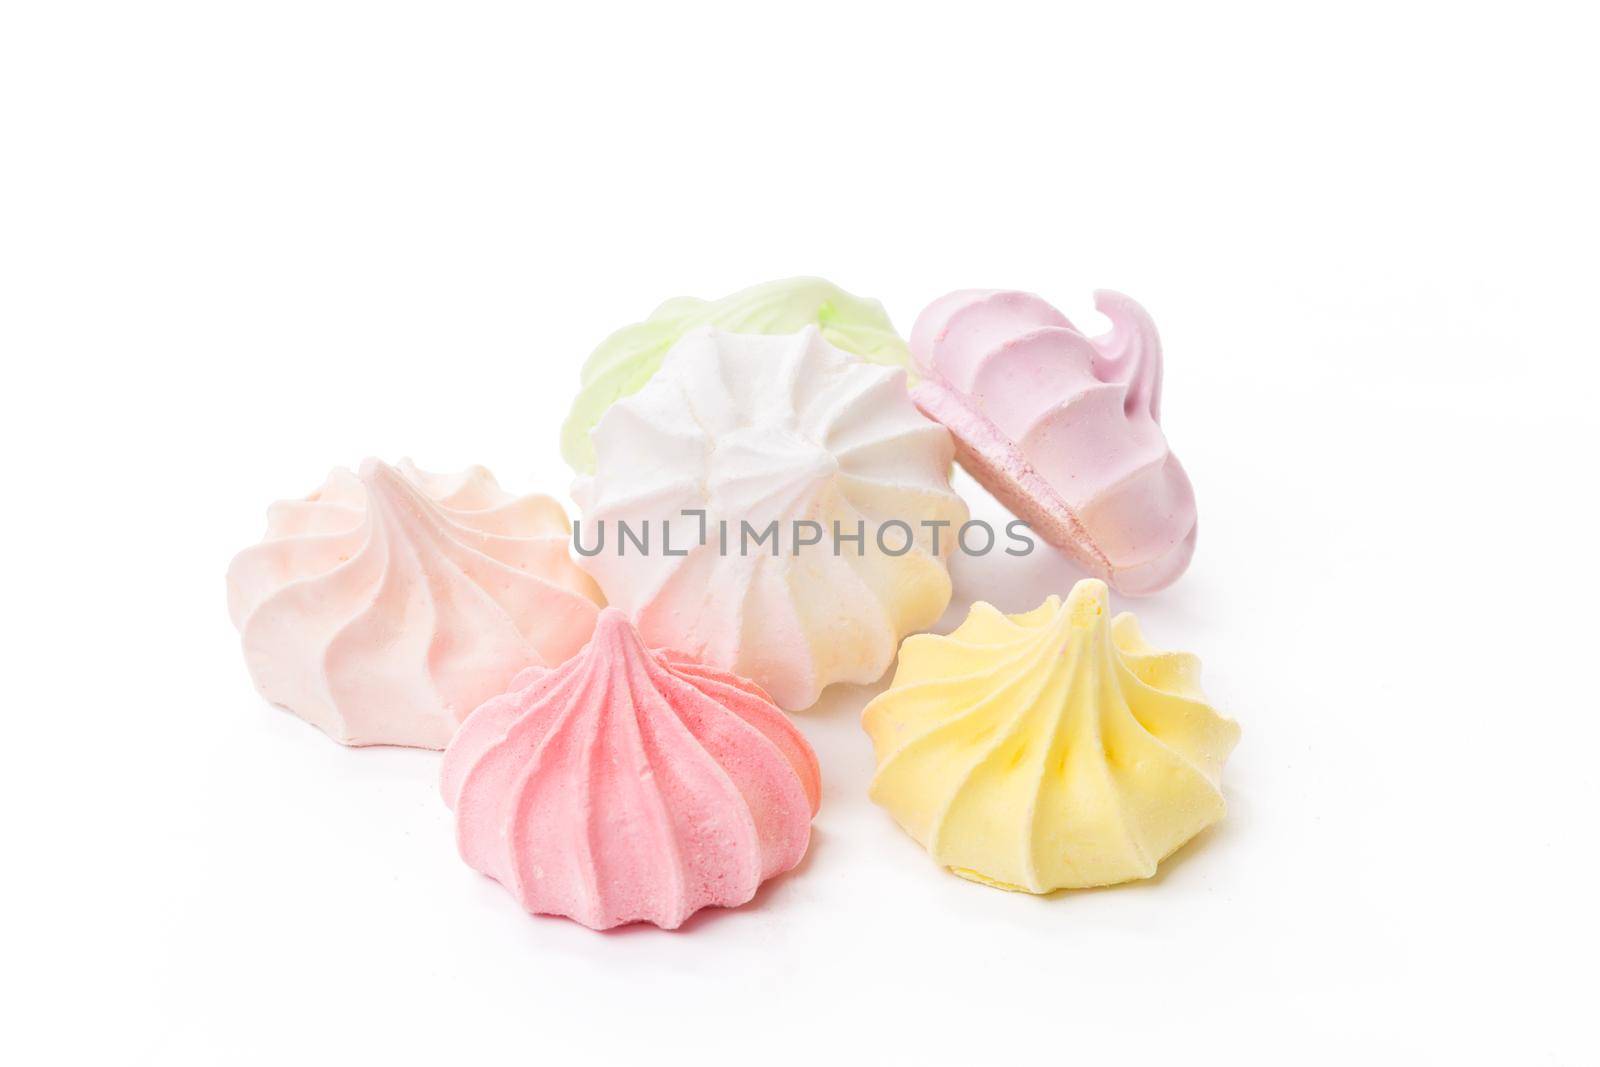 Pile of colorful meringue cookies isolated on white background